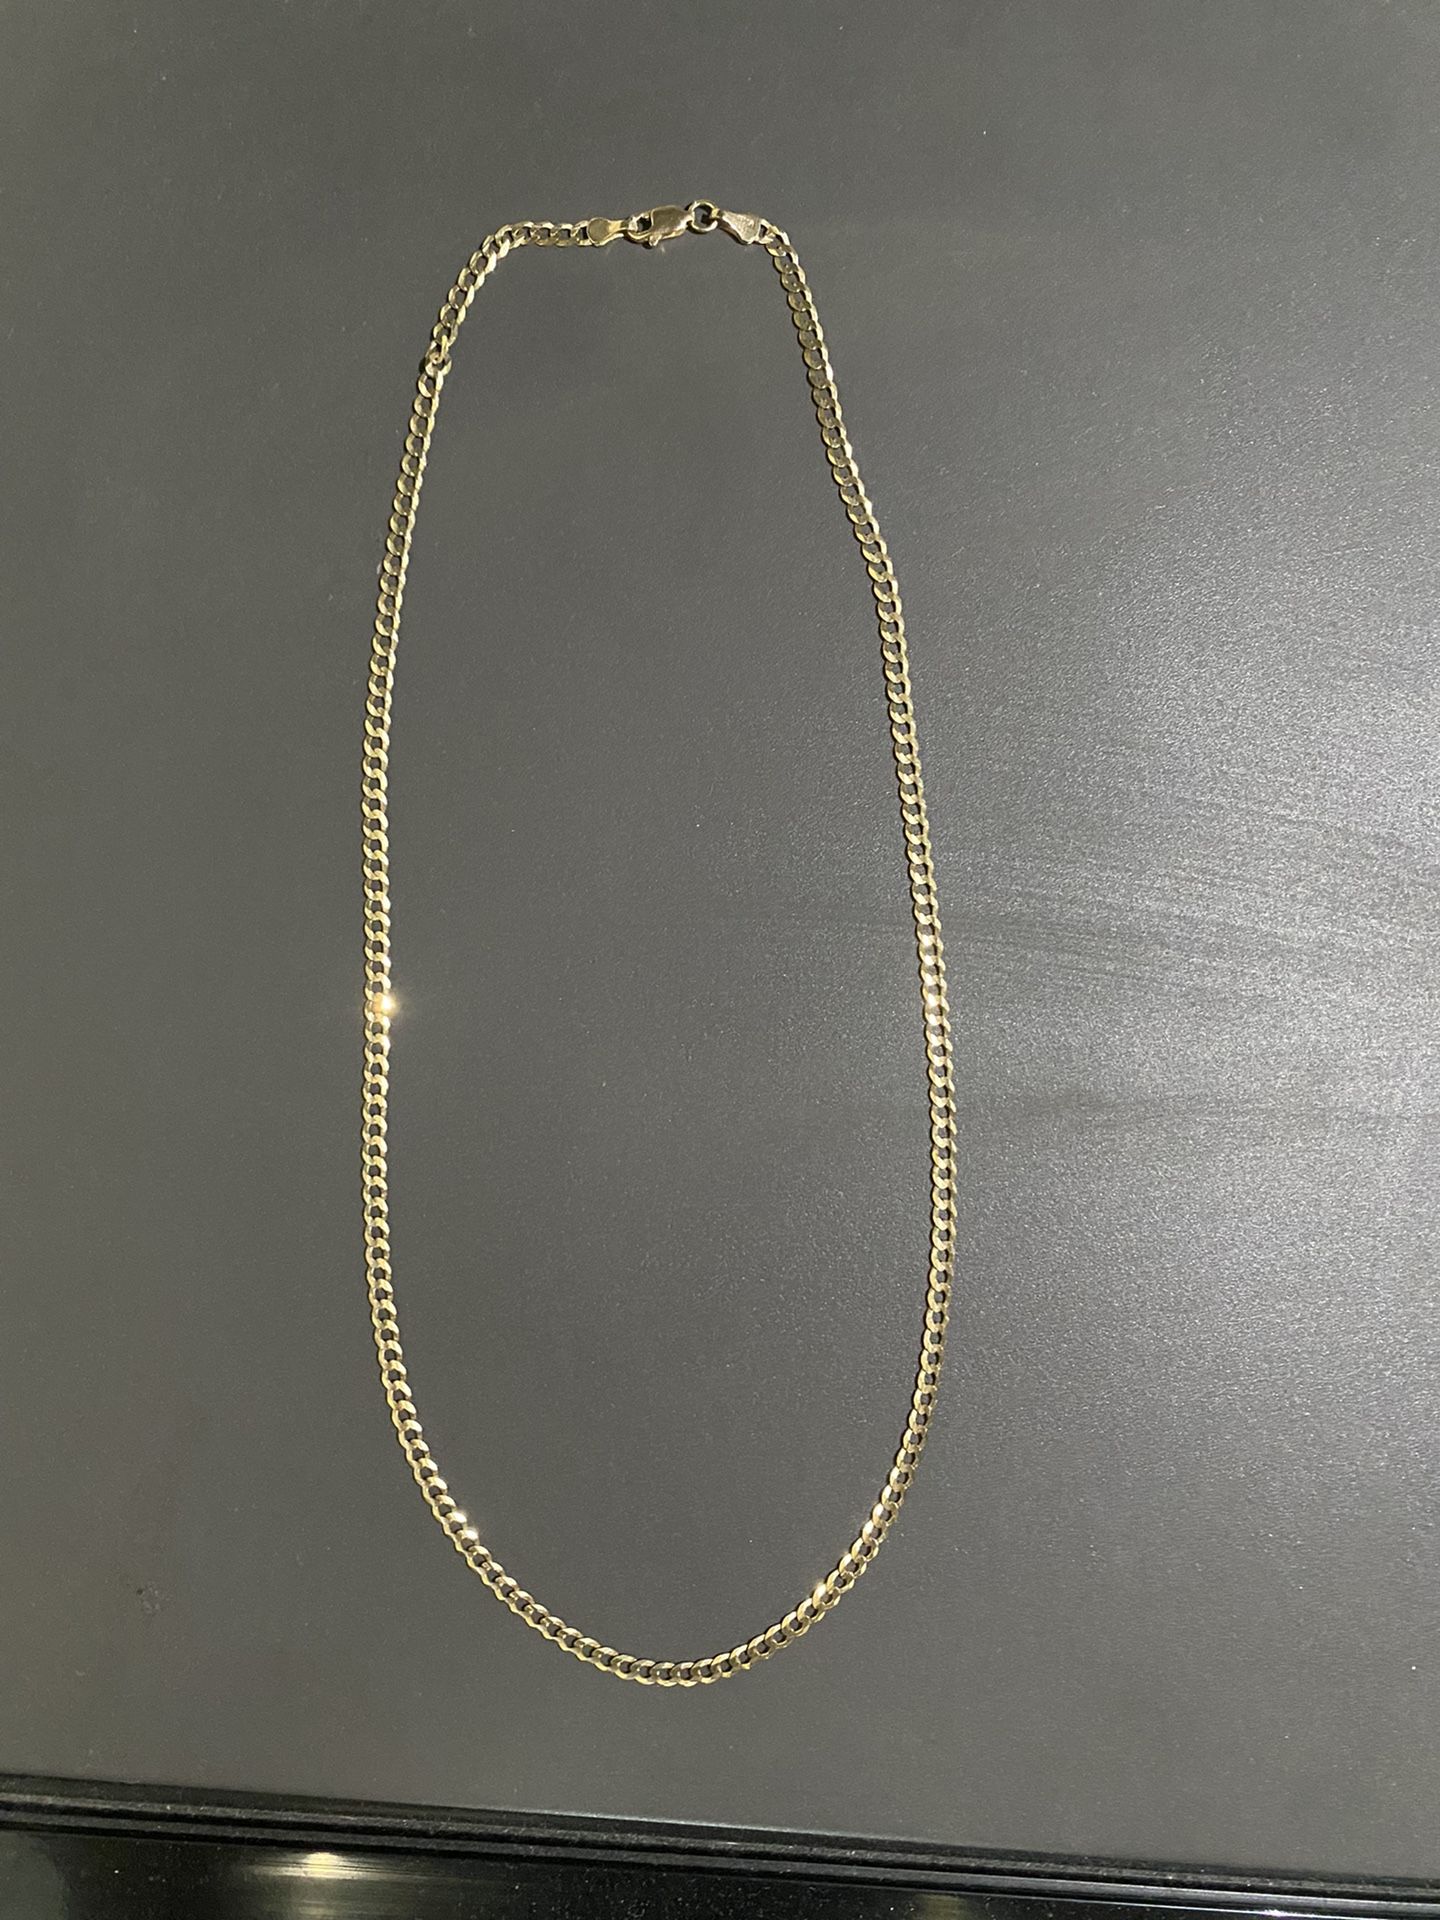 10k Gold Chain for Sale in Spring Valley, CA - OfferUp